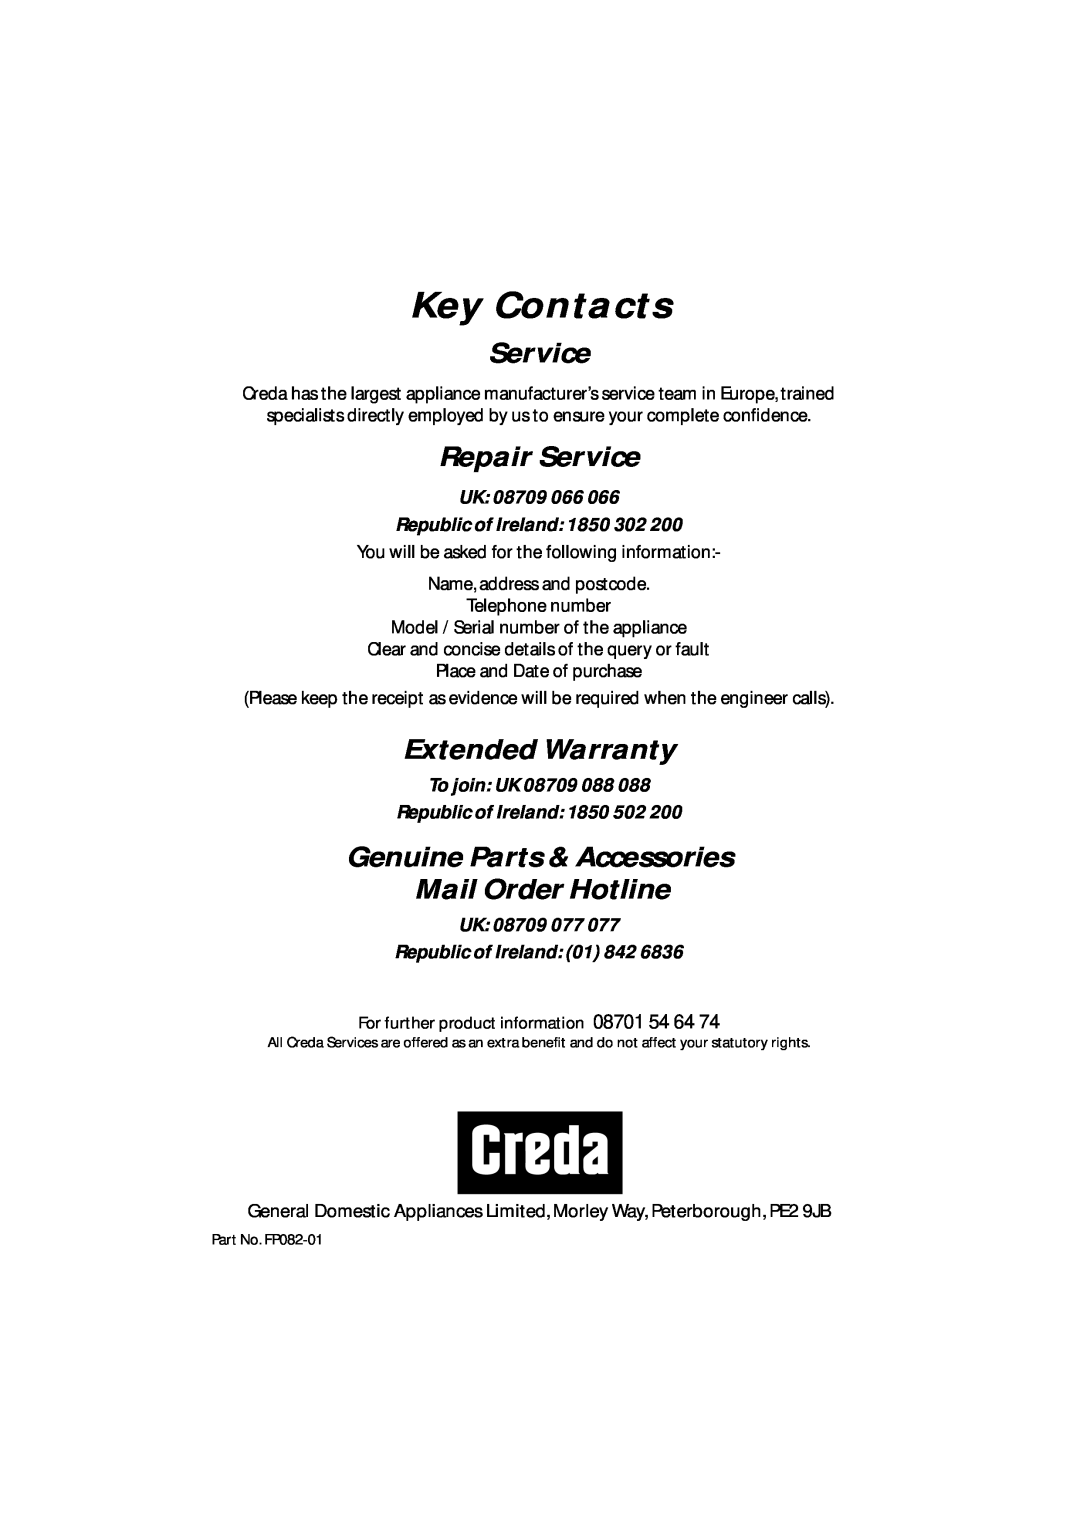 Creda CRC90, CRC65 Key Contacts, Repair Service, Extended Warranty, Genuine Parts & Accessories Mail Order Hotline 